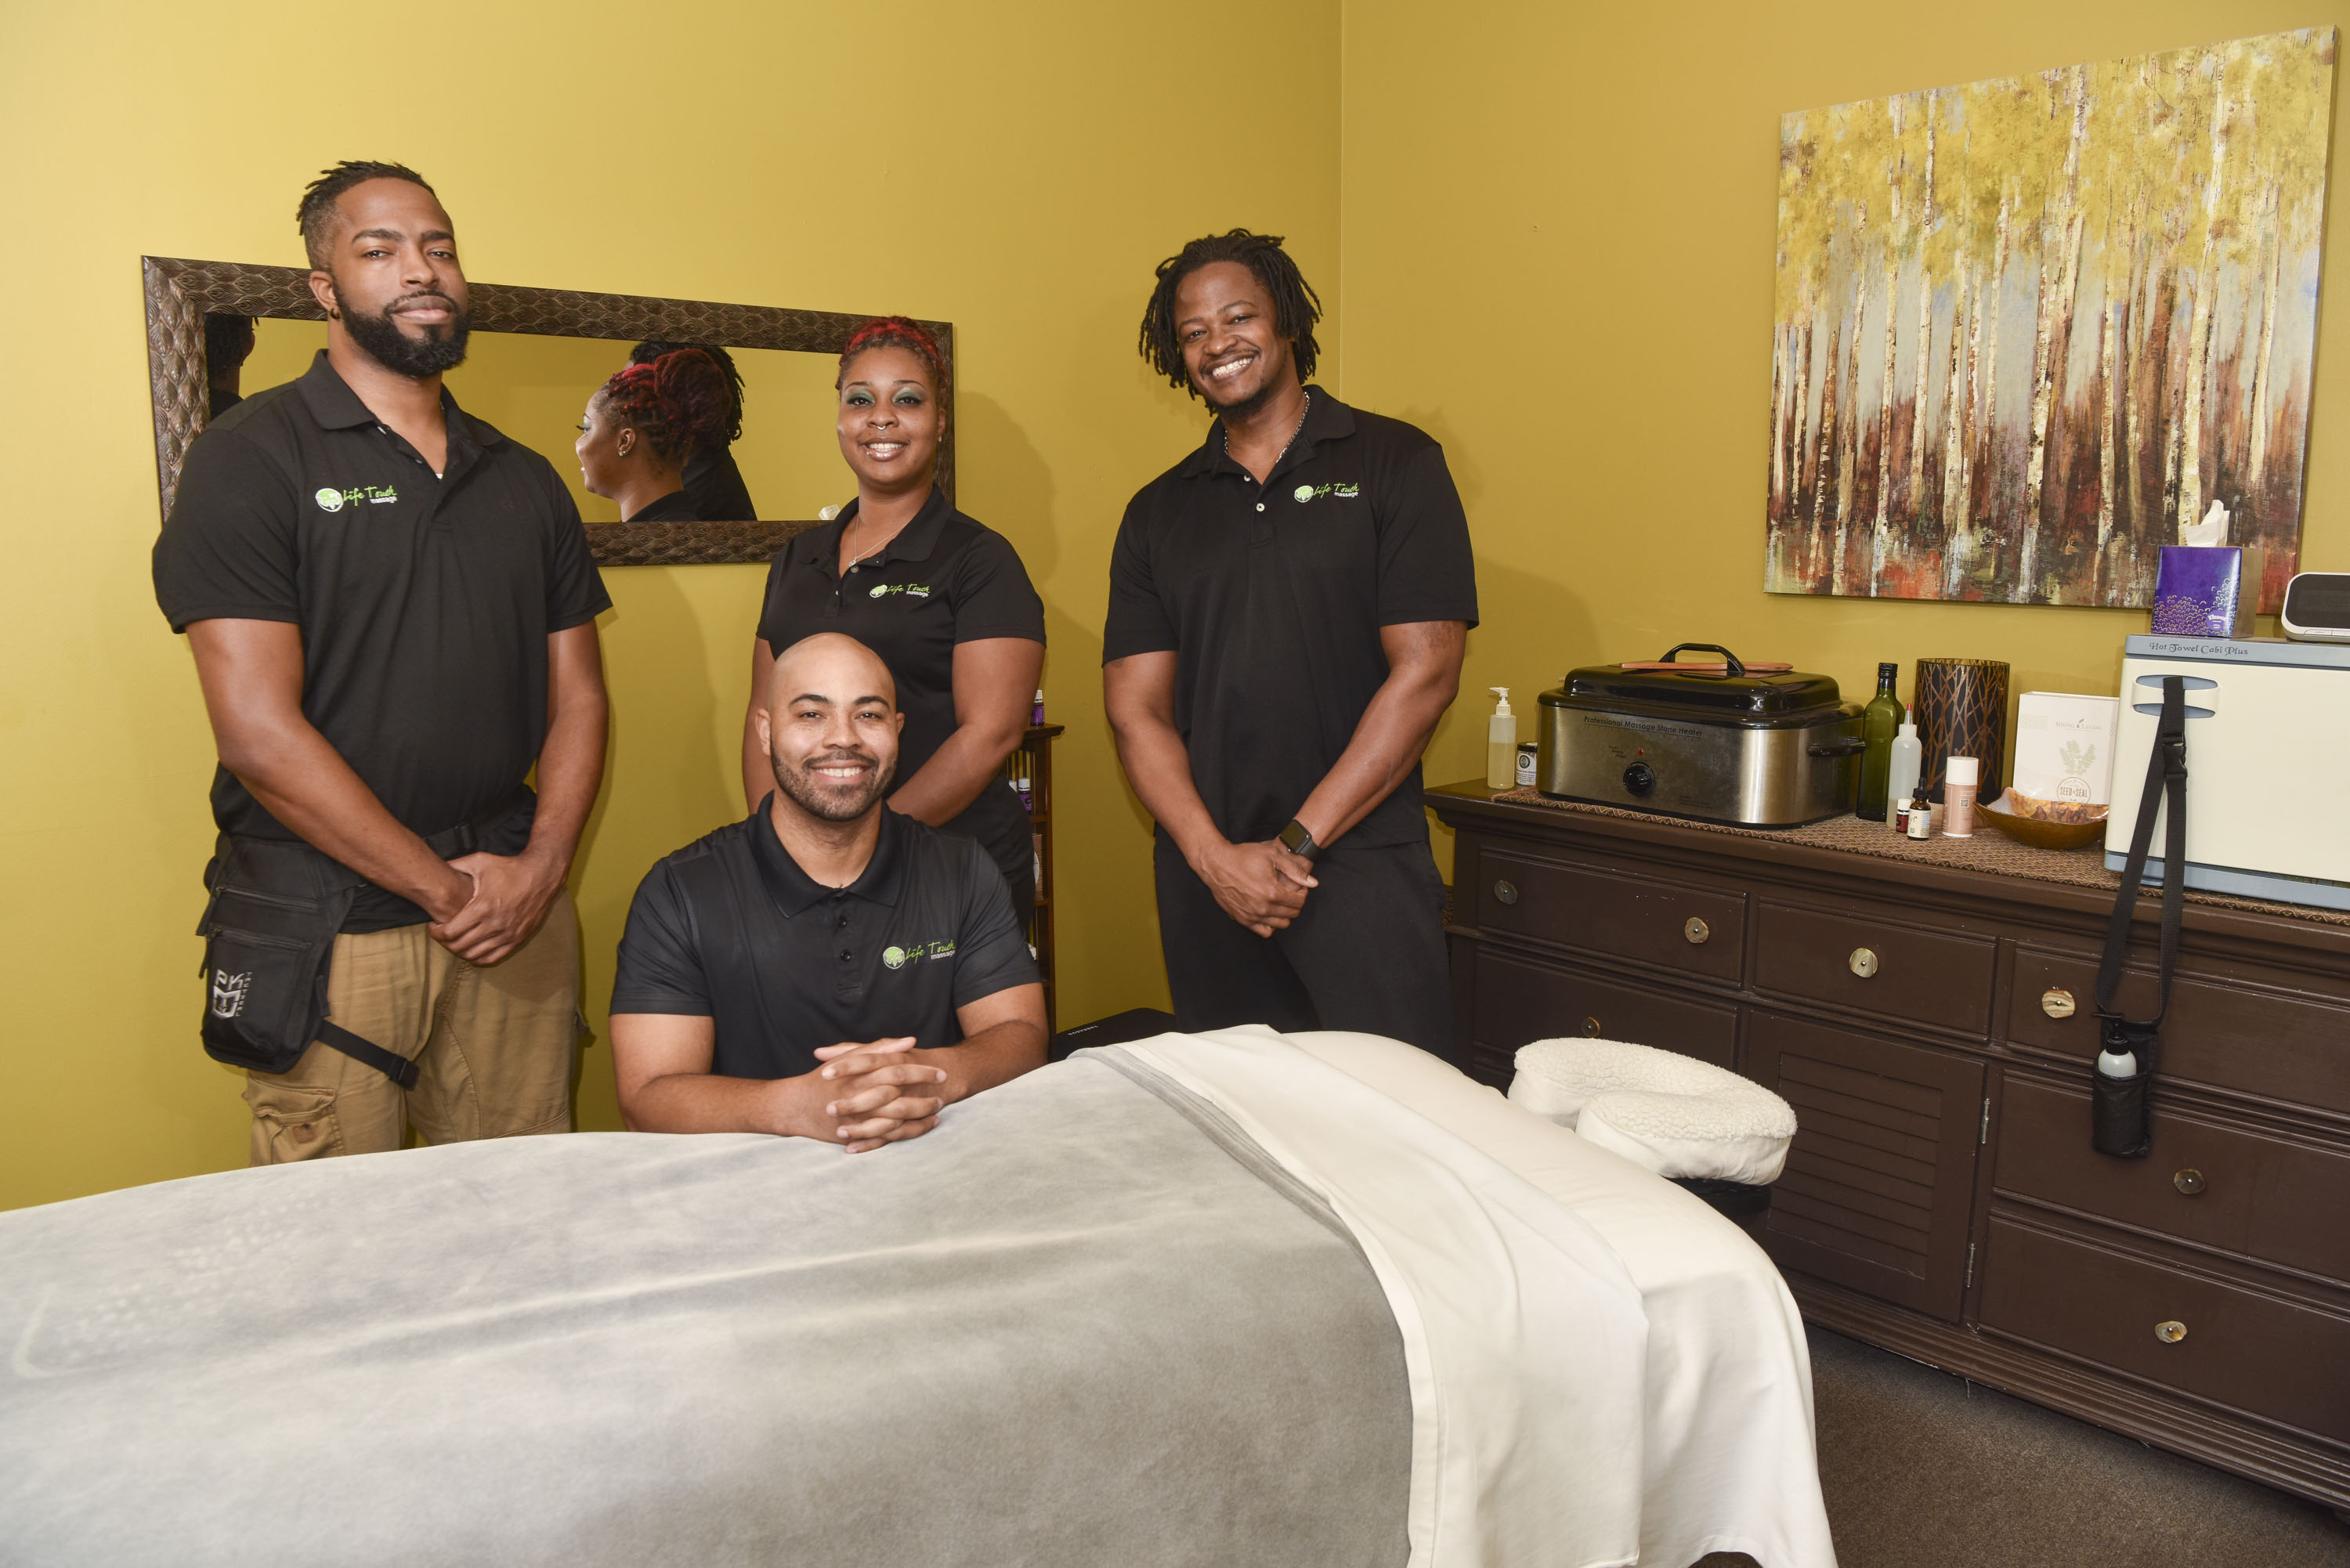 The Personal Touch at Birmingham’s Life Touch Massage, LLC